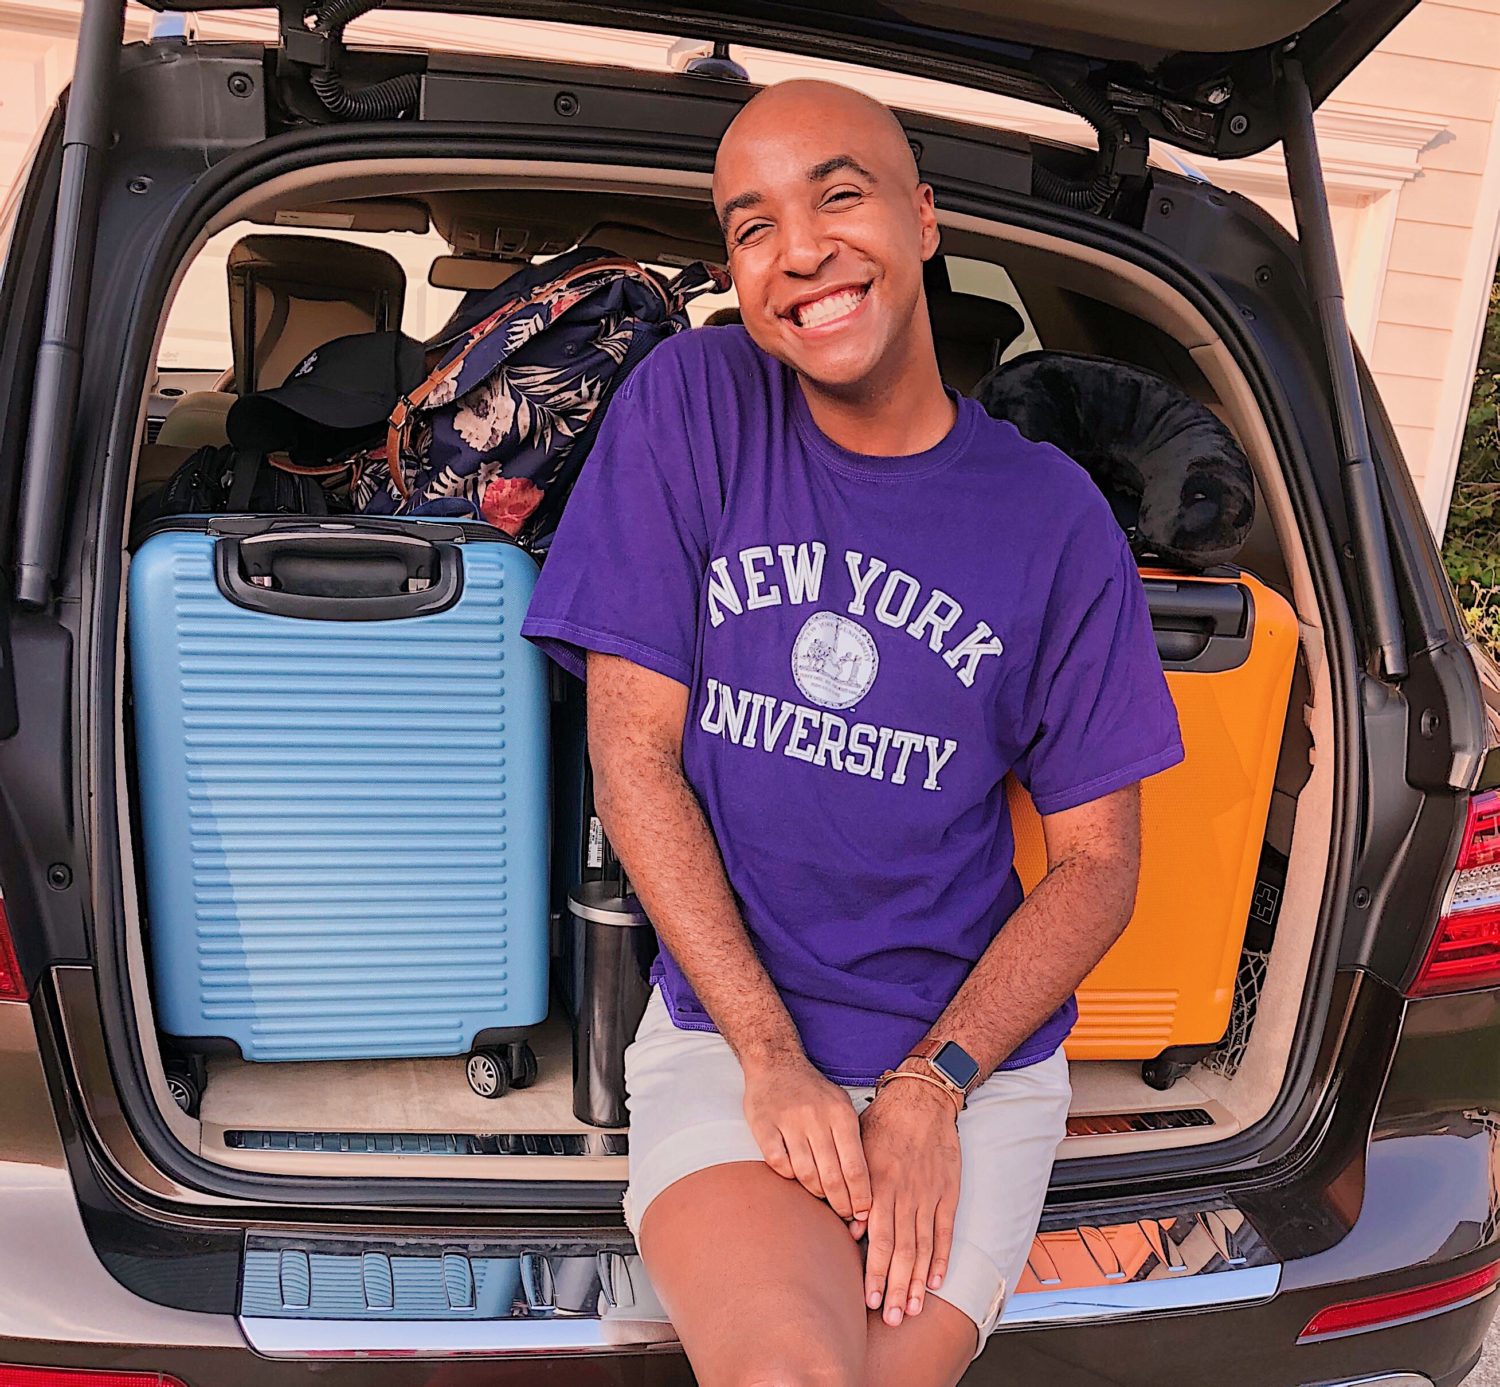 An NYU student sitting in front of suitcases in the truck of a car.